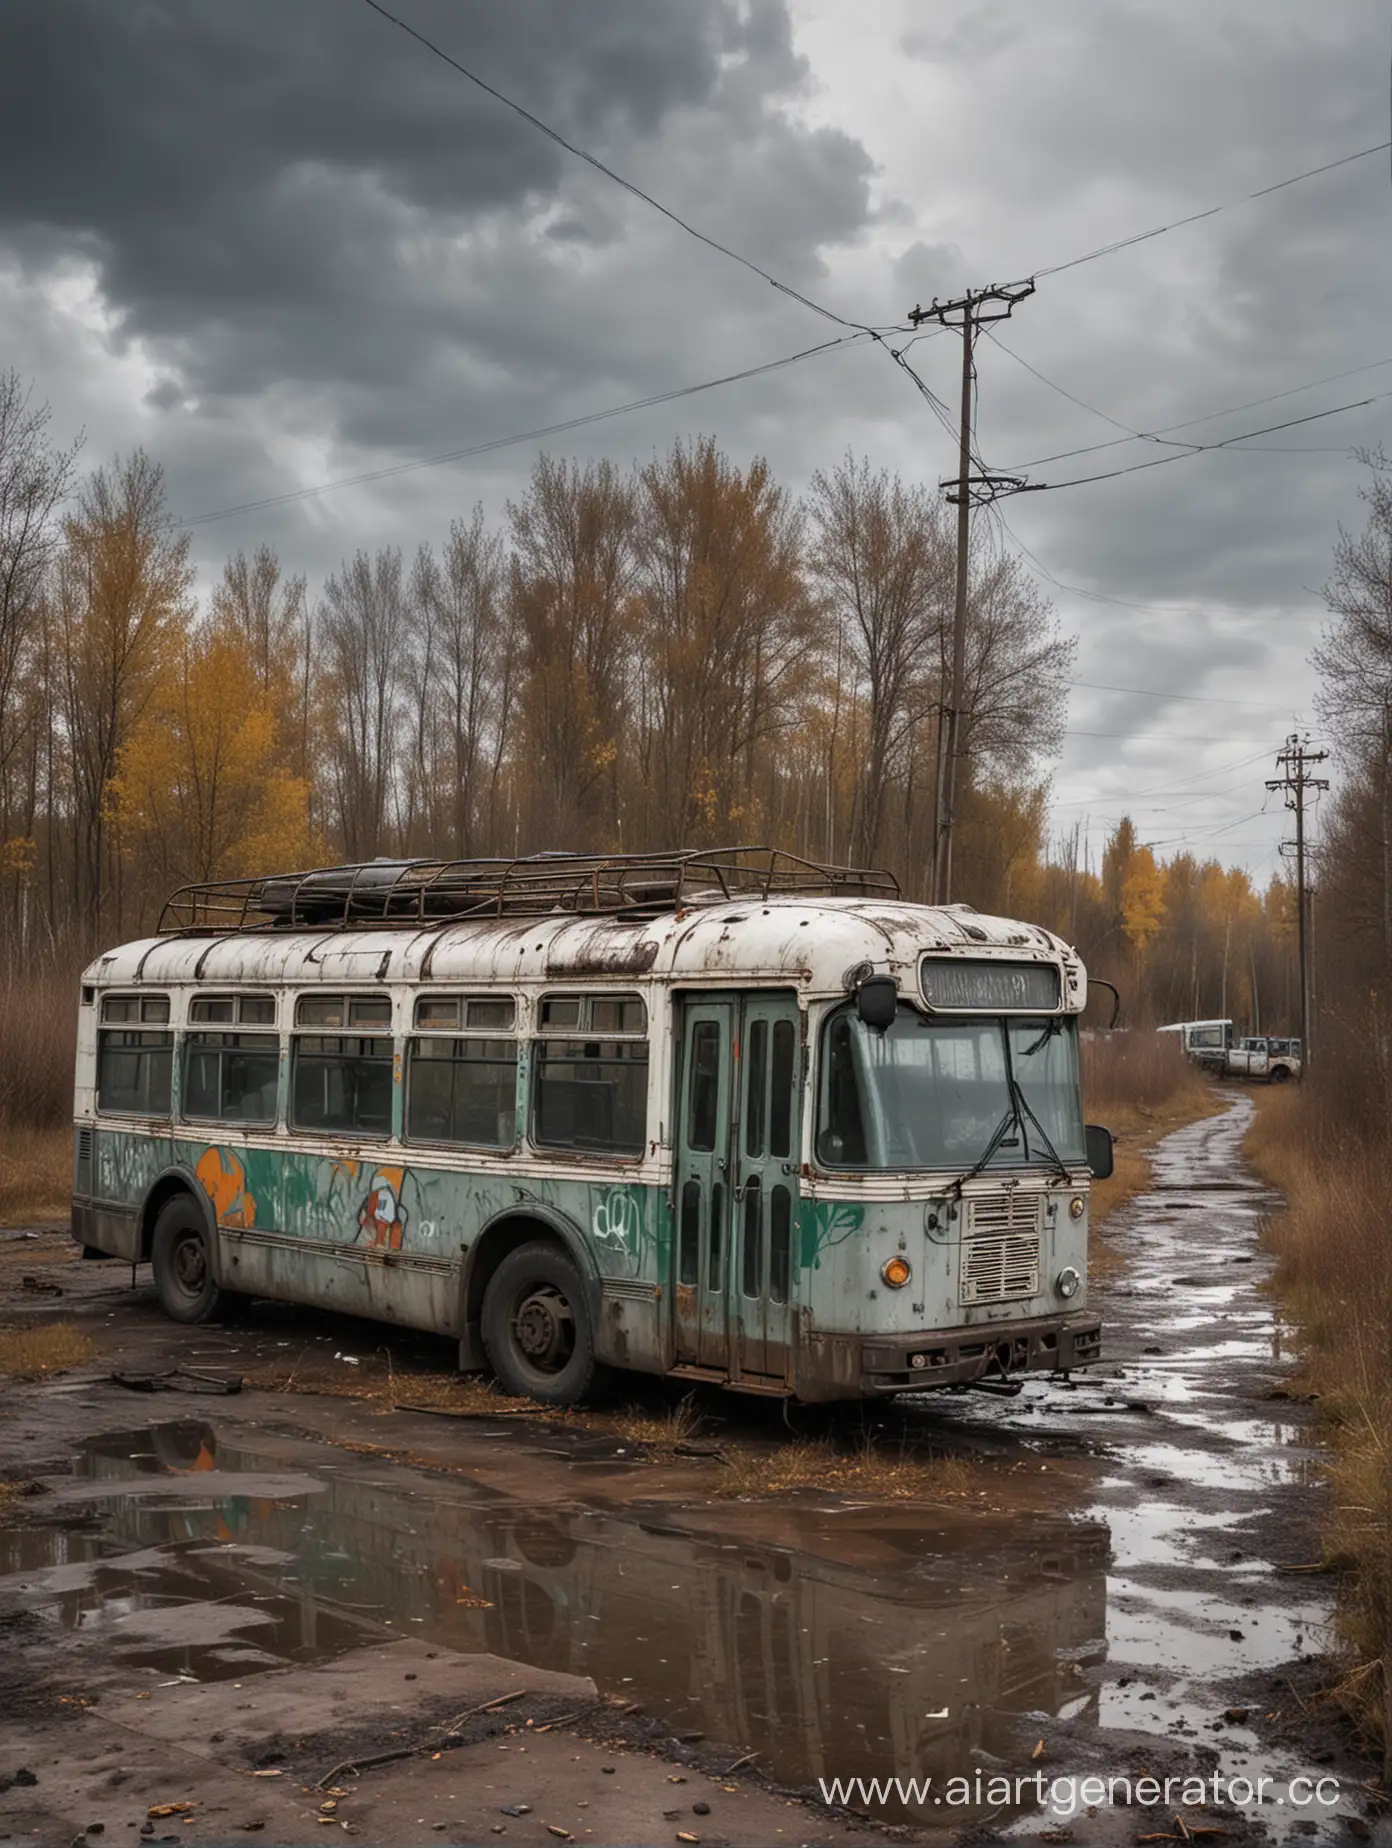 Abandoned-Trolleybus-in-Russian-City-Autumn-Rain-Graffiti-Walls-and-Gray-Clouds